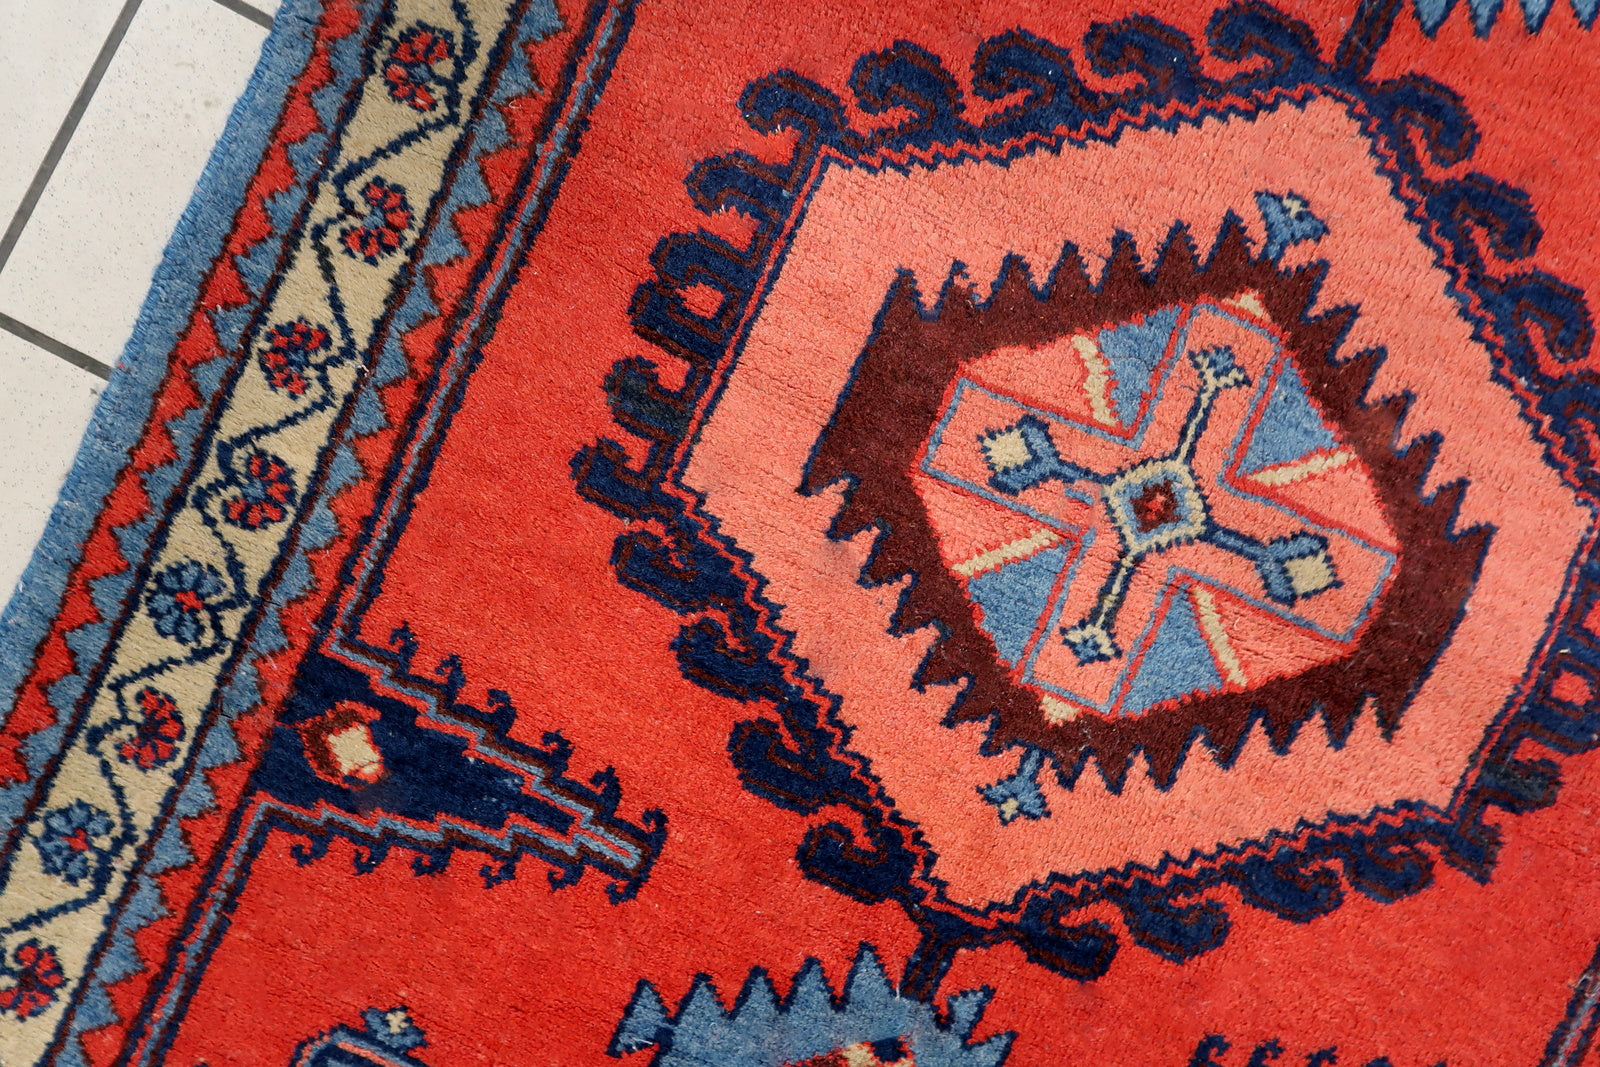 Handmade vintage rug in bright red color from Persian Hamadan region. The rug is from the end of 20th century in original good condition.